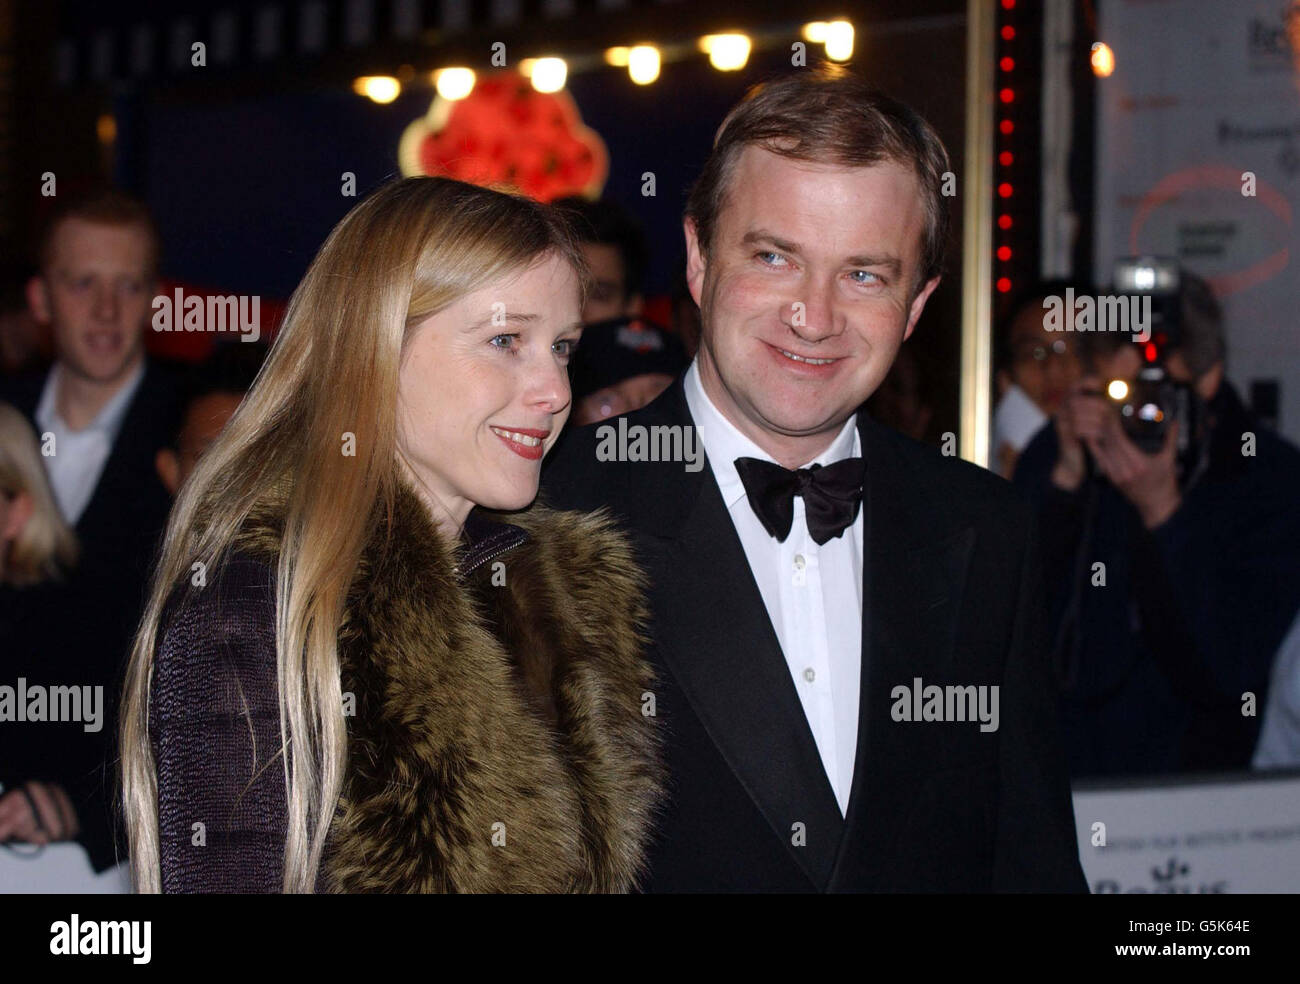 Harry Enfield and his wife Lucy arrive for the London Film Festival's closing gala premiere of his new film K-Pax at the Empire in Leicester Square, London. The film follows the story of a mysterious hospital patient who claims to be from another planet. Stock Photo